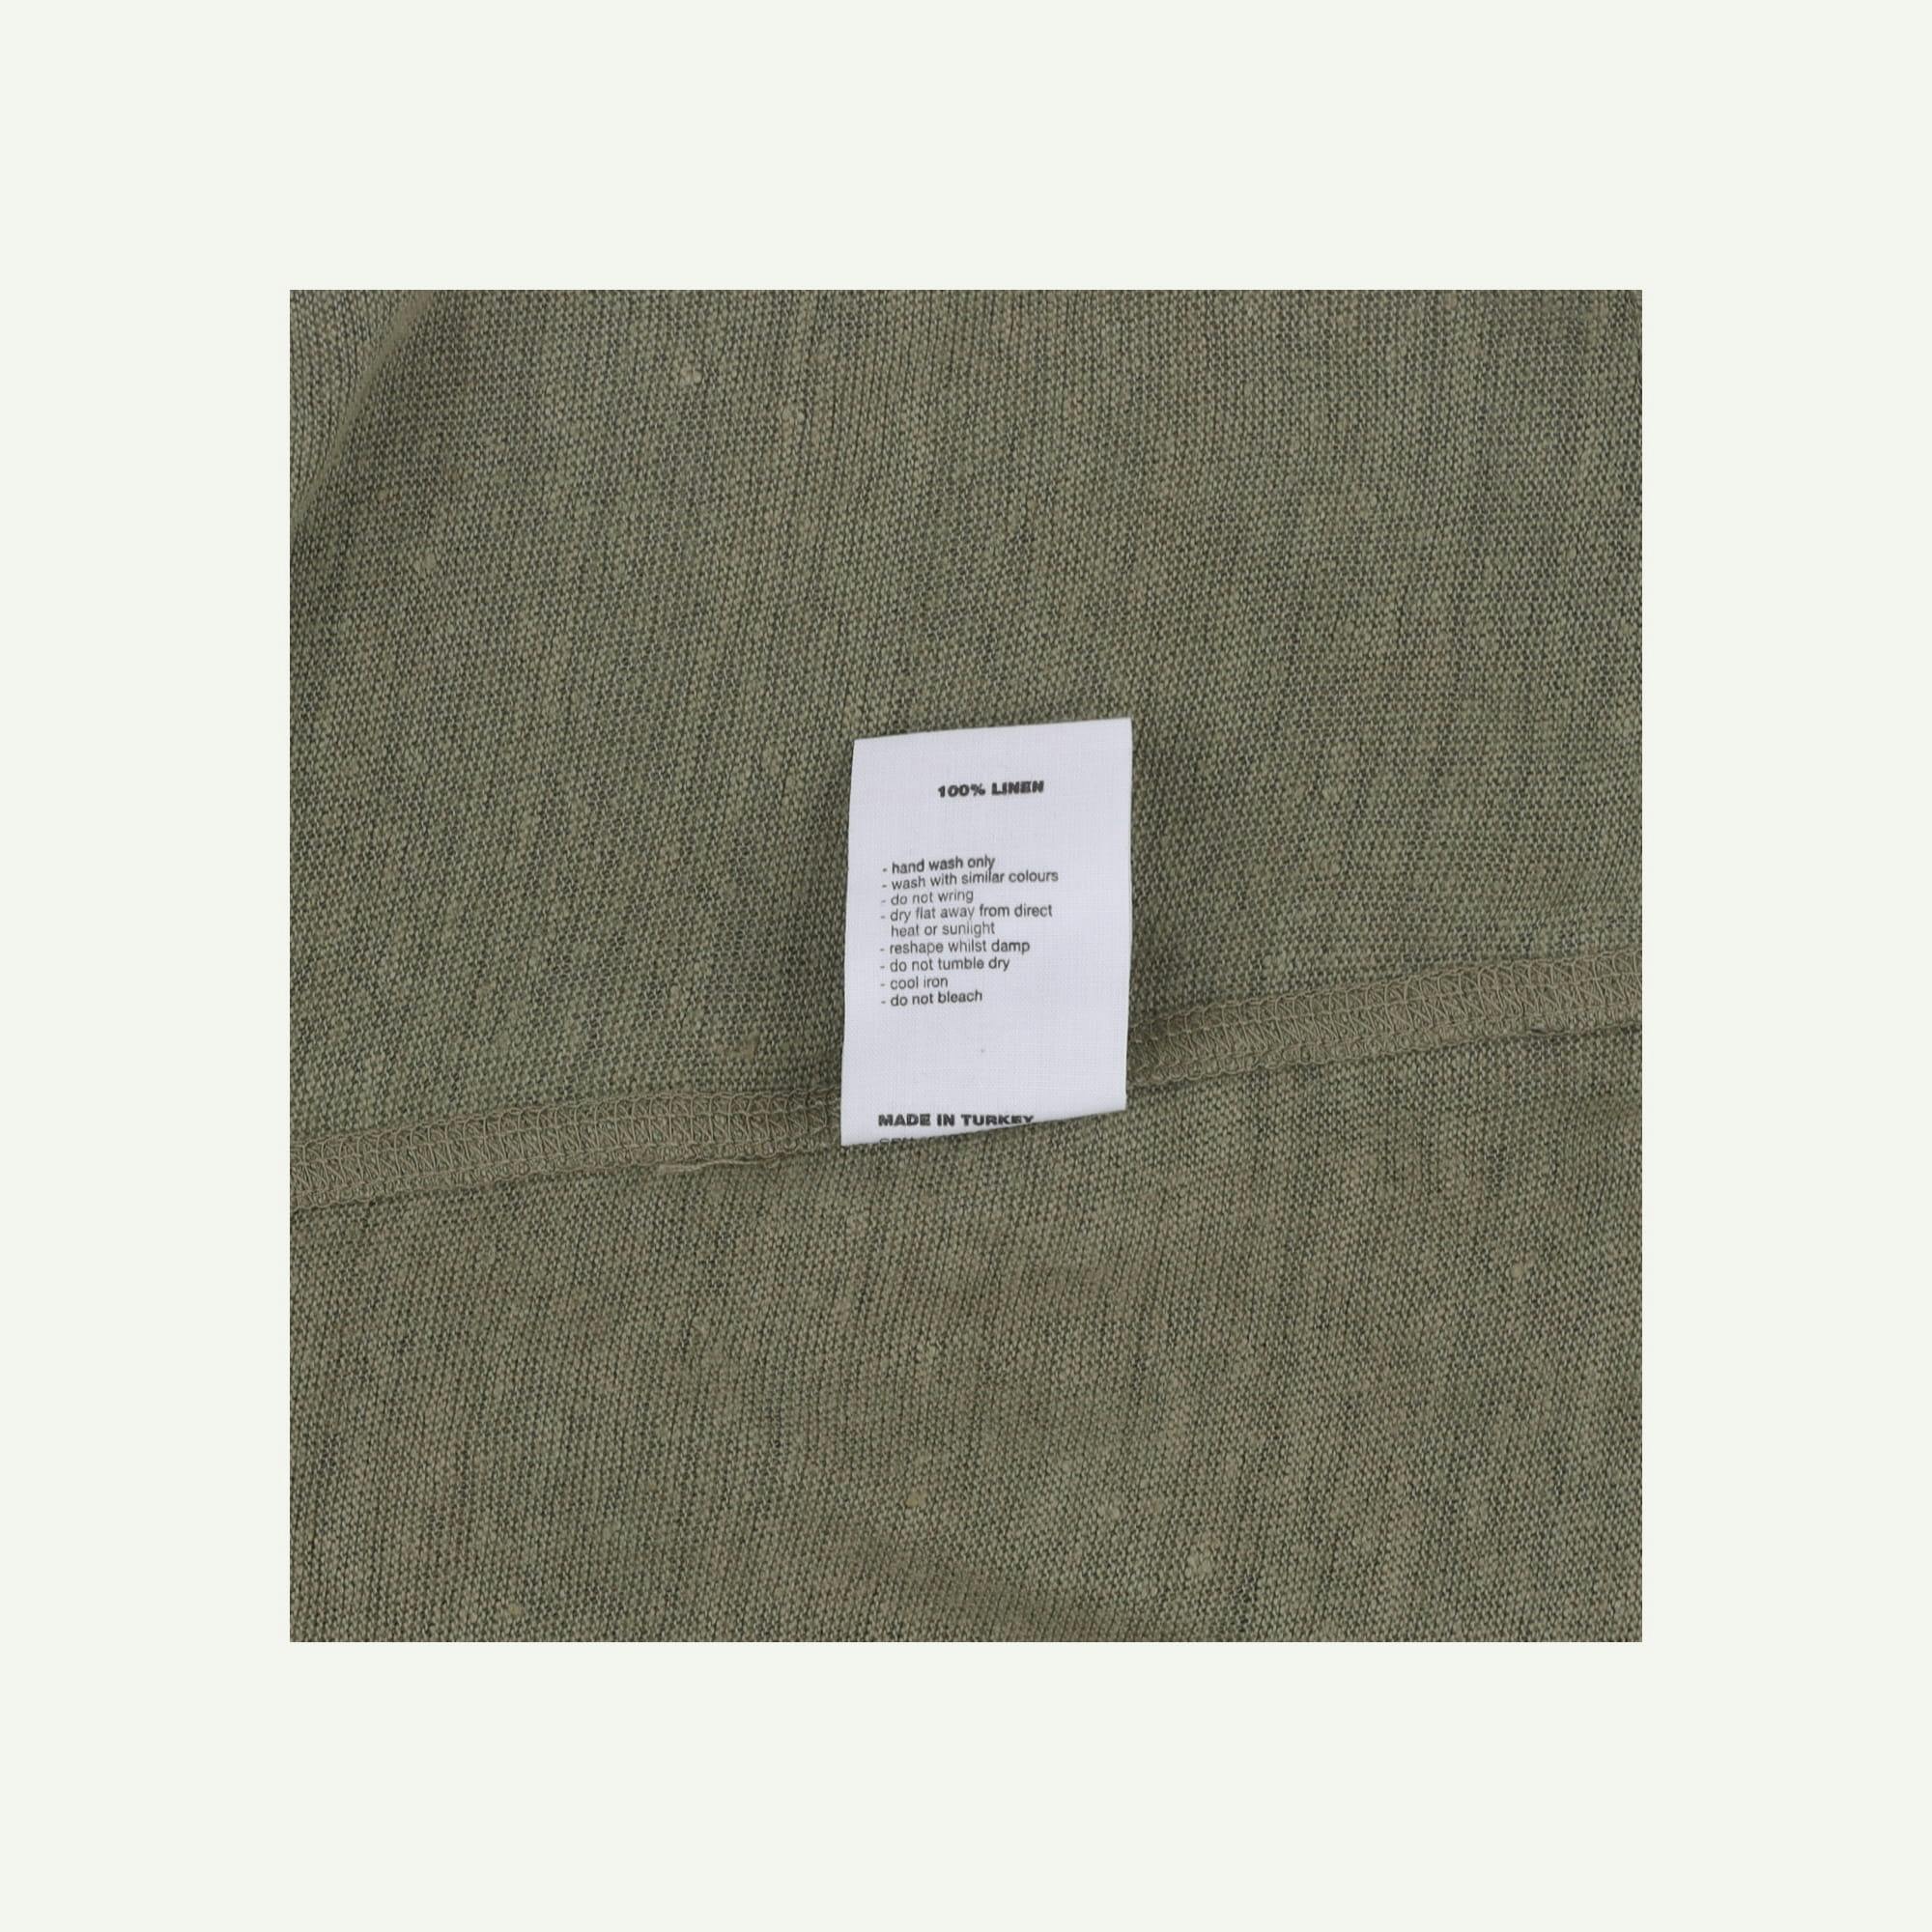 Finisterre As new Olive T-shirt